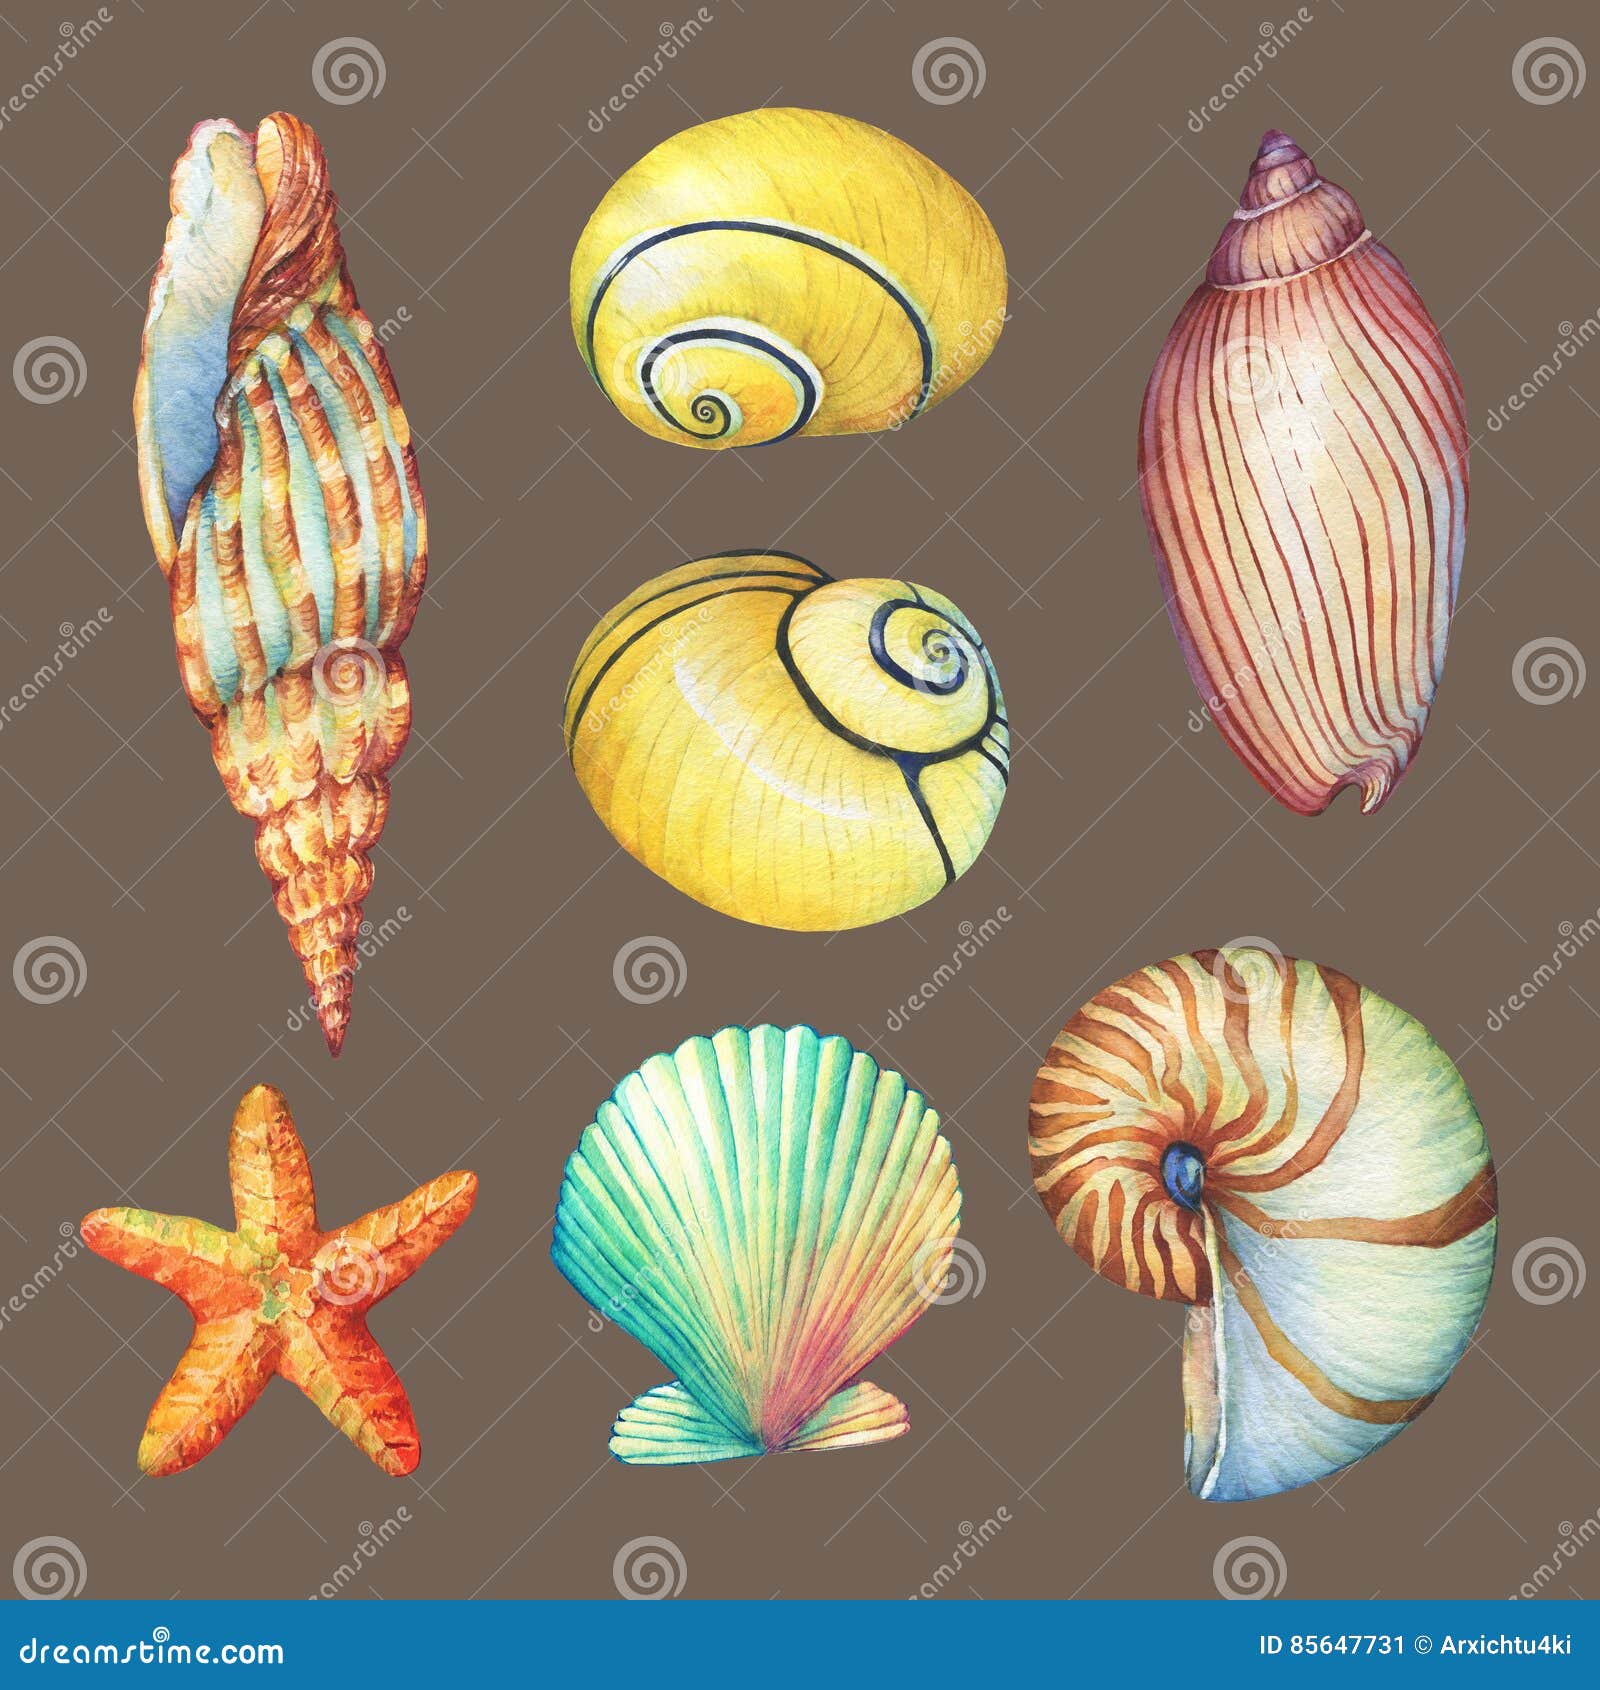 set of underwater life objects - s of various tropical seashells and starfish.